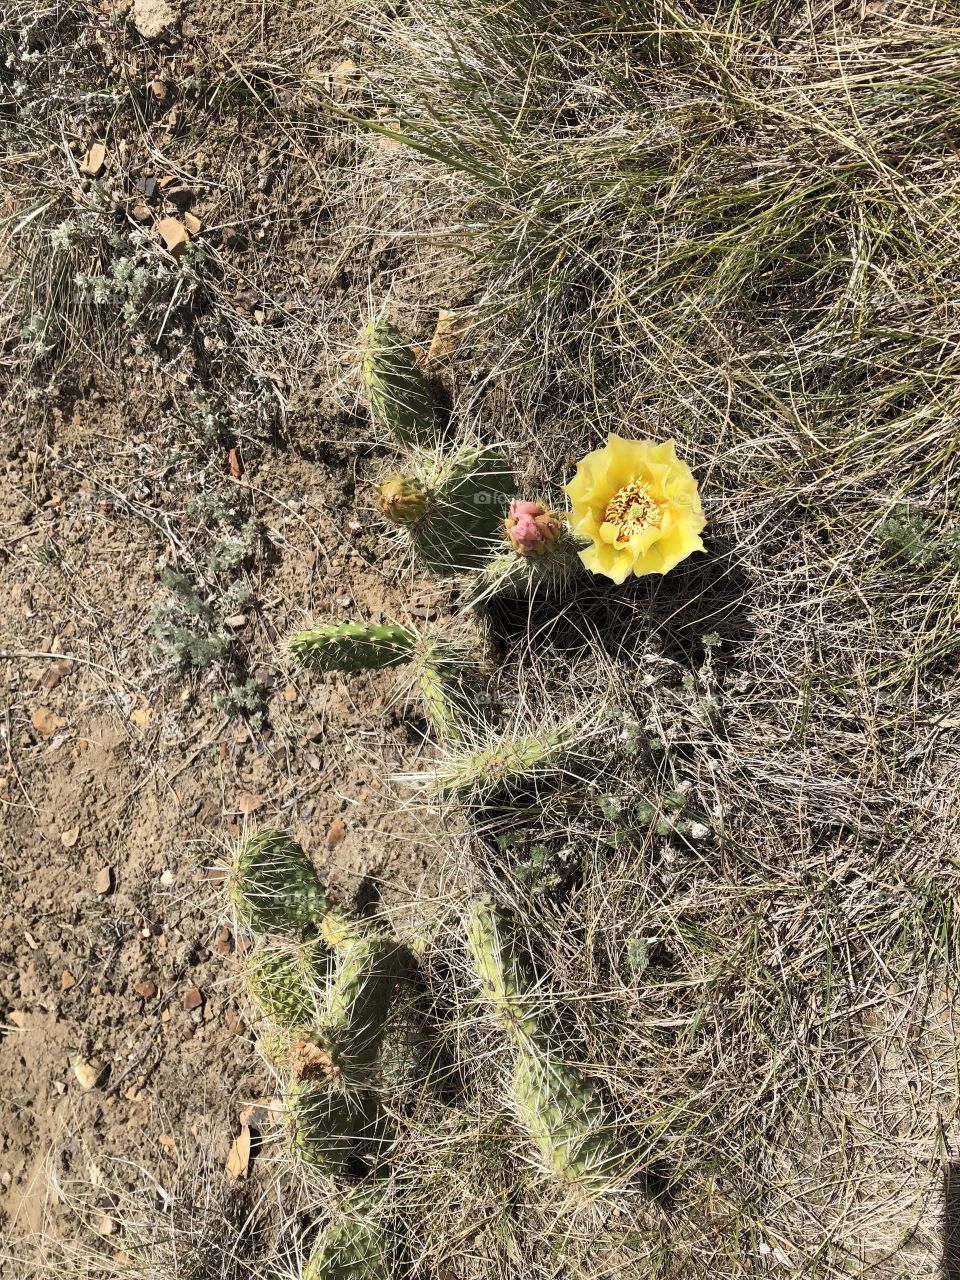 Blooming Cactus in the Badlands 